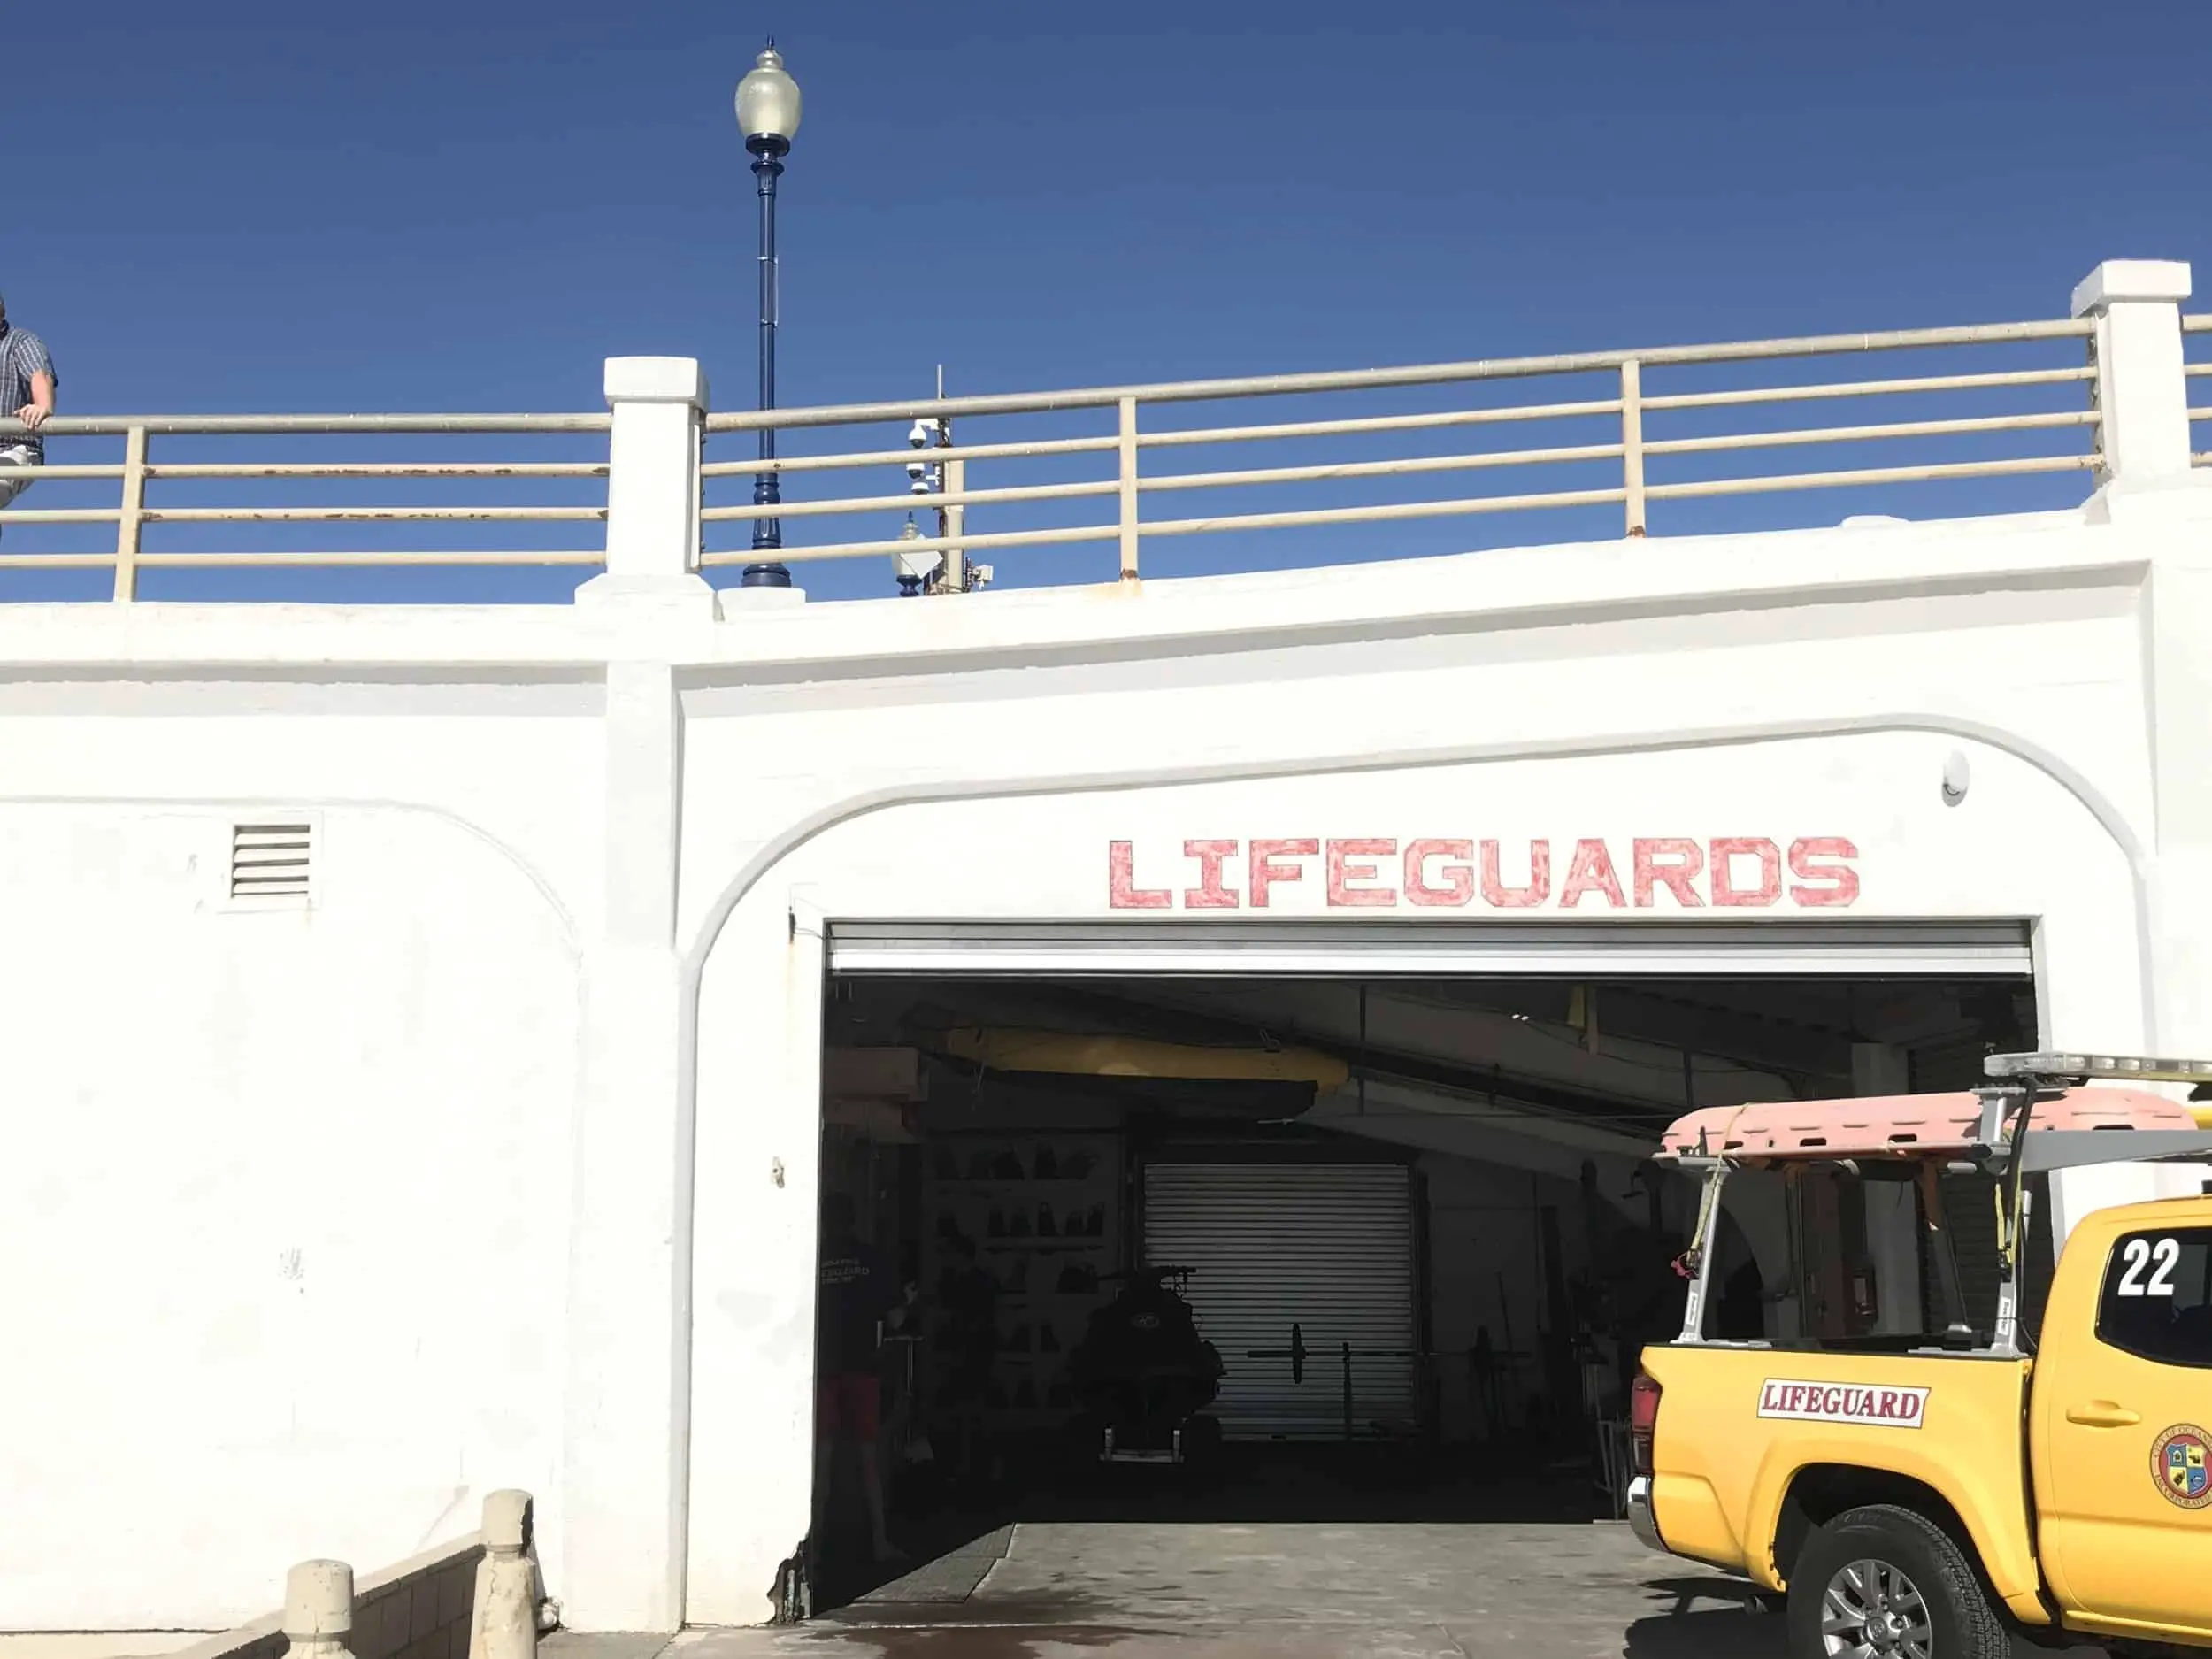 A clear blue sky over the white painted pier. Underneath the pier is a lifeguard headquarters with gym and swim equipment. A yellow truck with surfboards is parked outside the garage. the word "lifeguards" is painted in red above the garage. Oceanside Pier in downtown Oceanside, California, United States of America